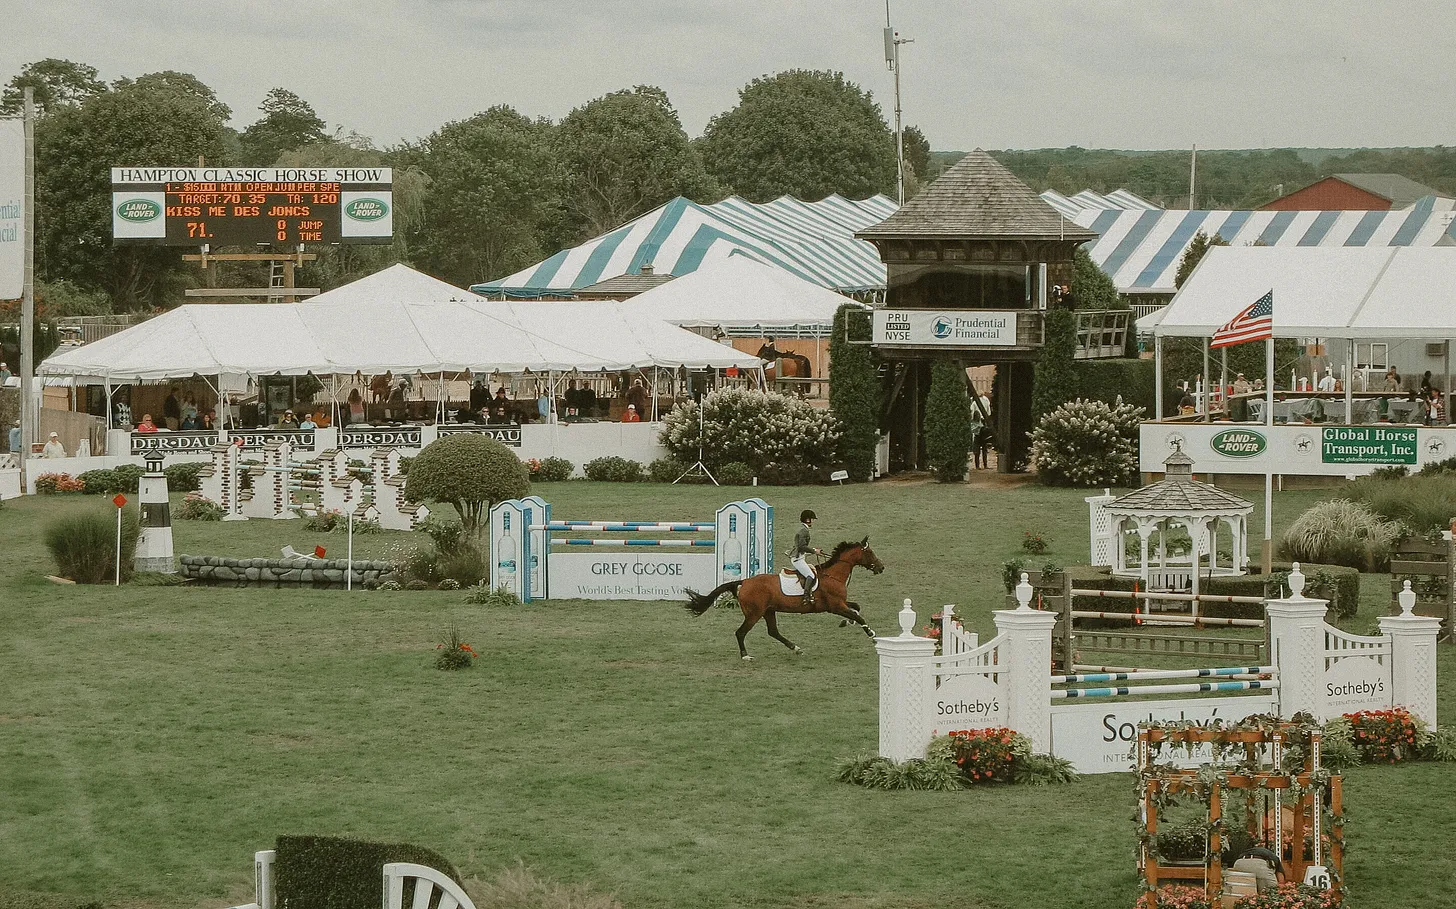 Hamptons grass show jumping course with grand prix stands